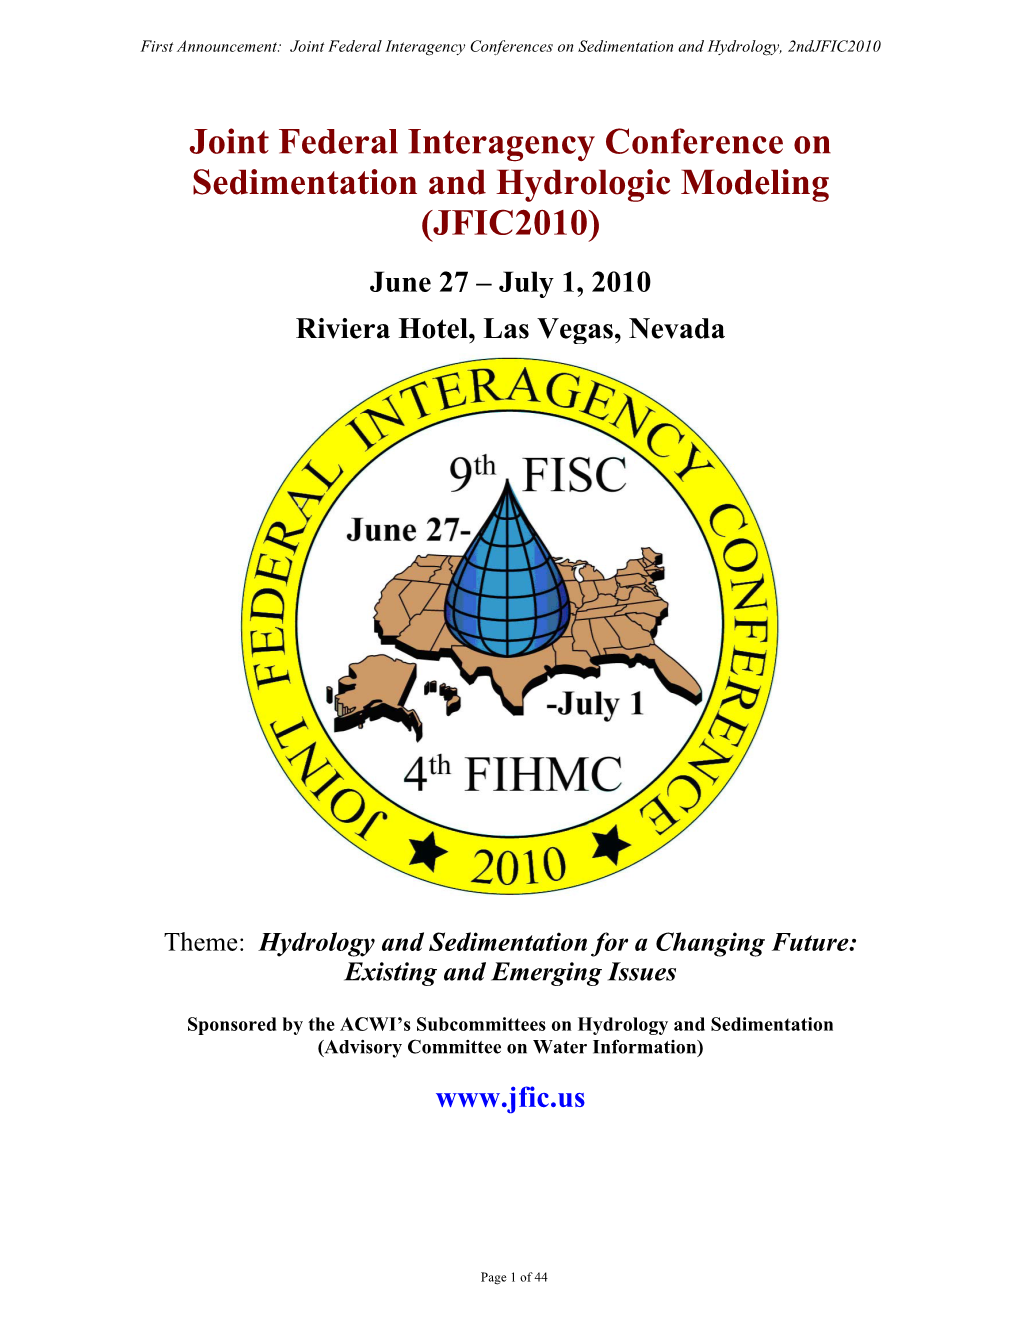 Joint Federal Interagency Conference on Sedimentation and Hydrologic Modeling (JFIC2010)